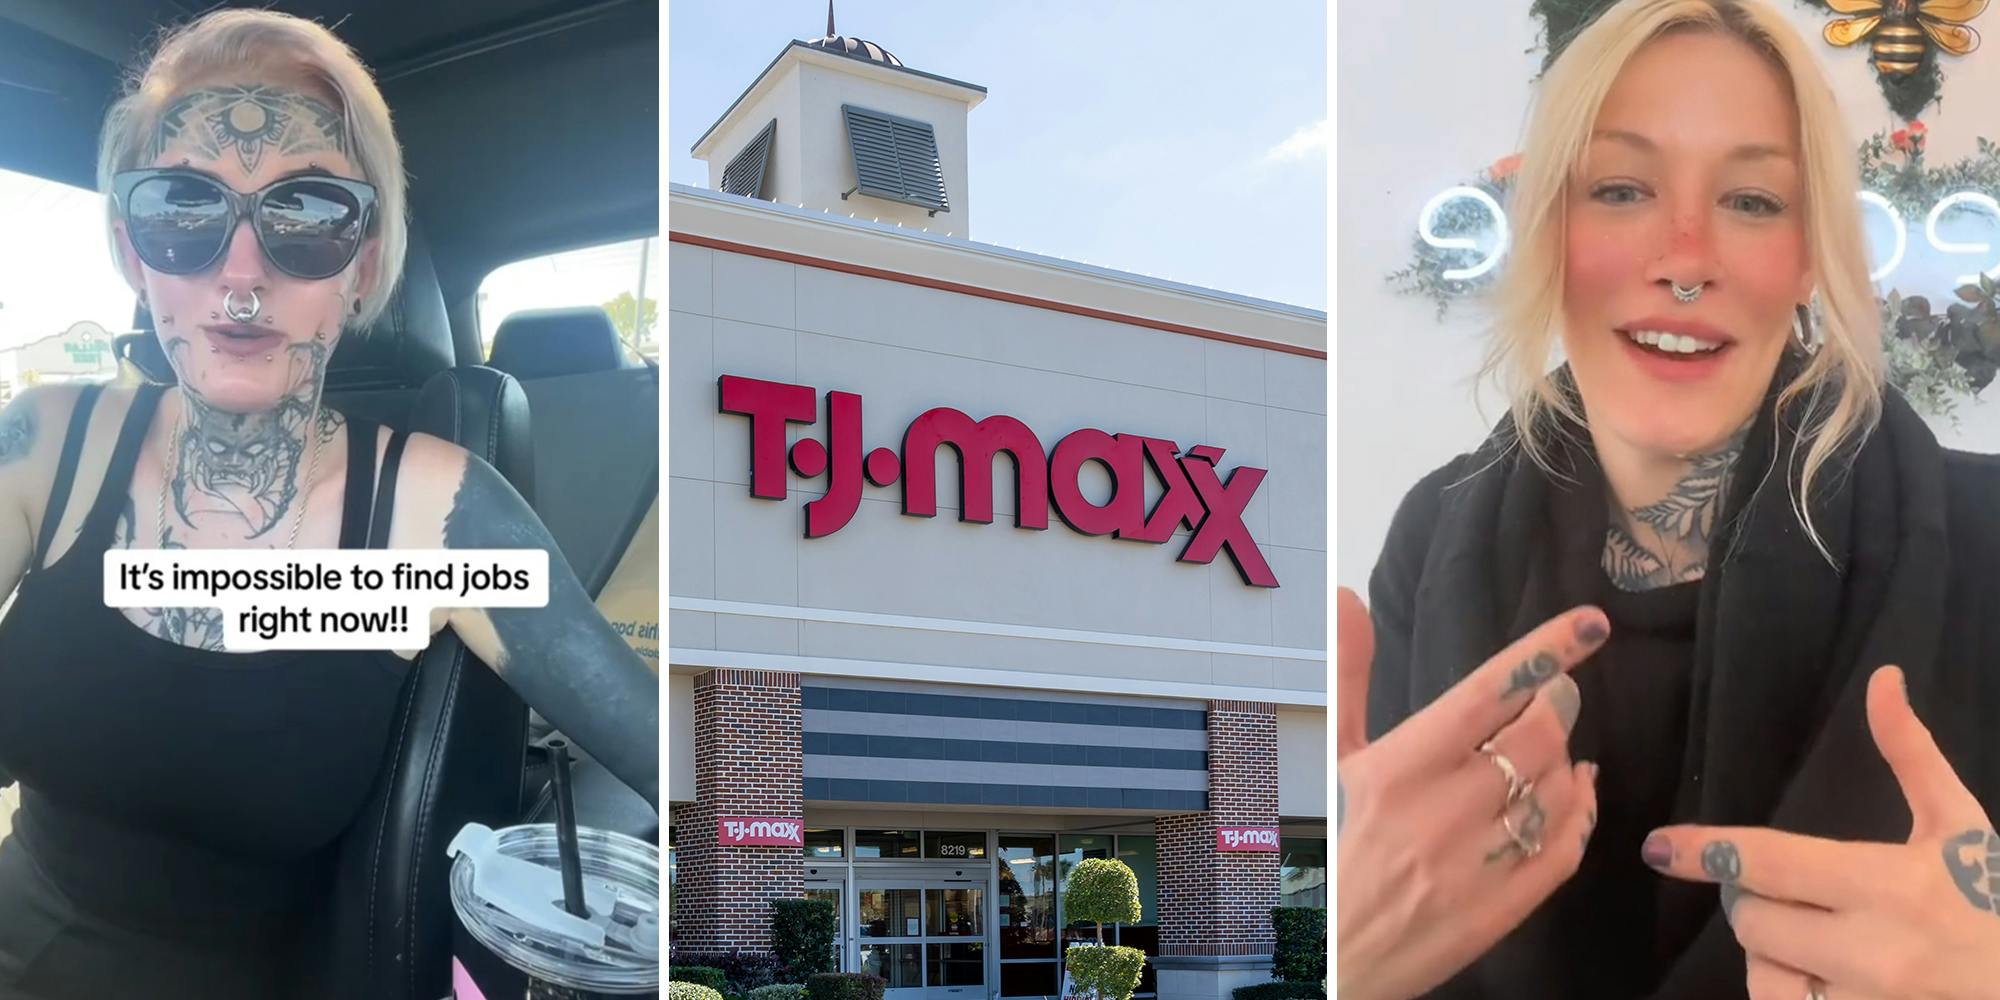 ‘I’m confused that you’re confused’: Jobseeker says T.J. Maxx rejected her job application. Viewers aren’t sympathetic